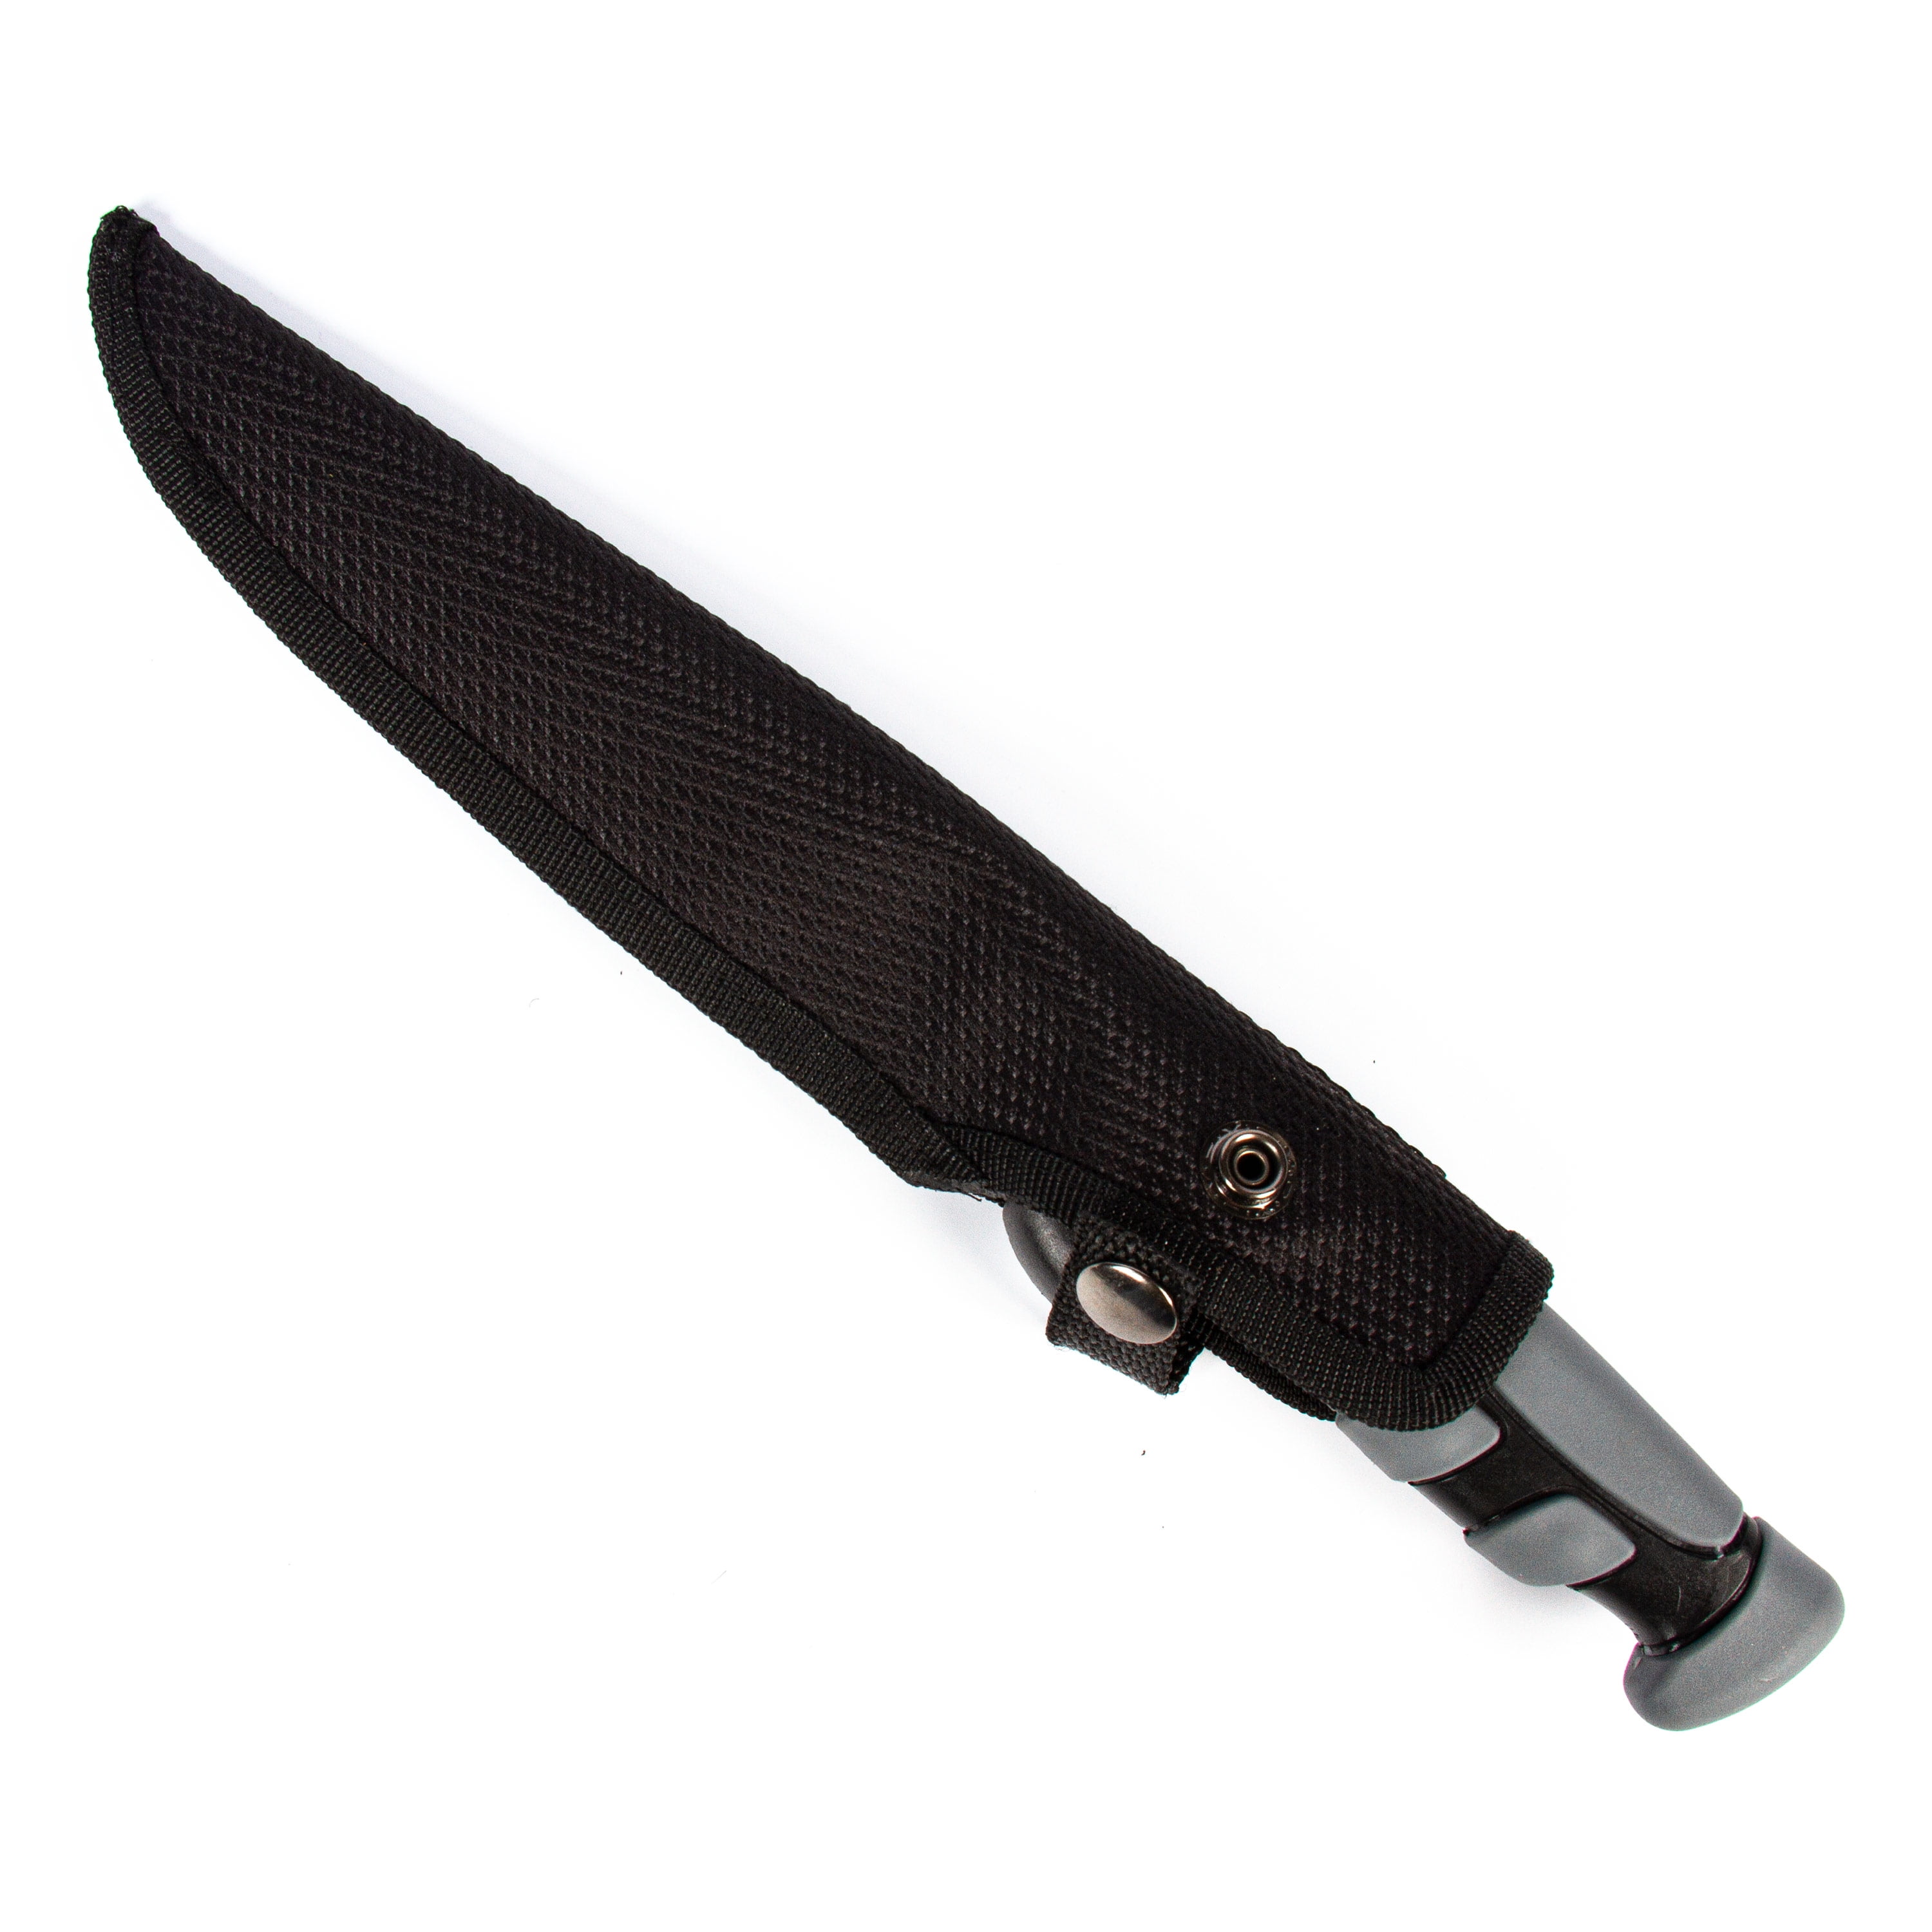 Kershaw Clearwater Fish Fillet Knife with Protective Sheath, 7” Blade 